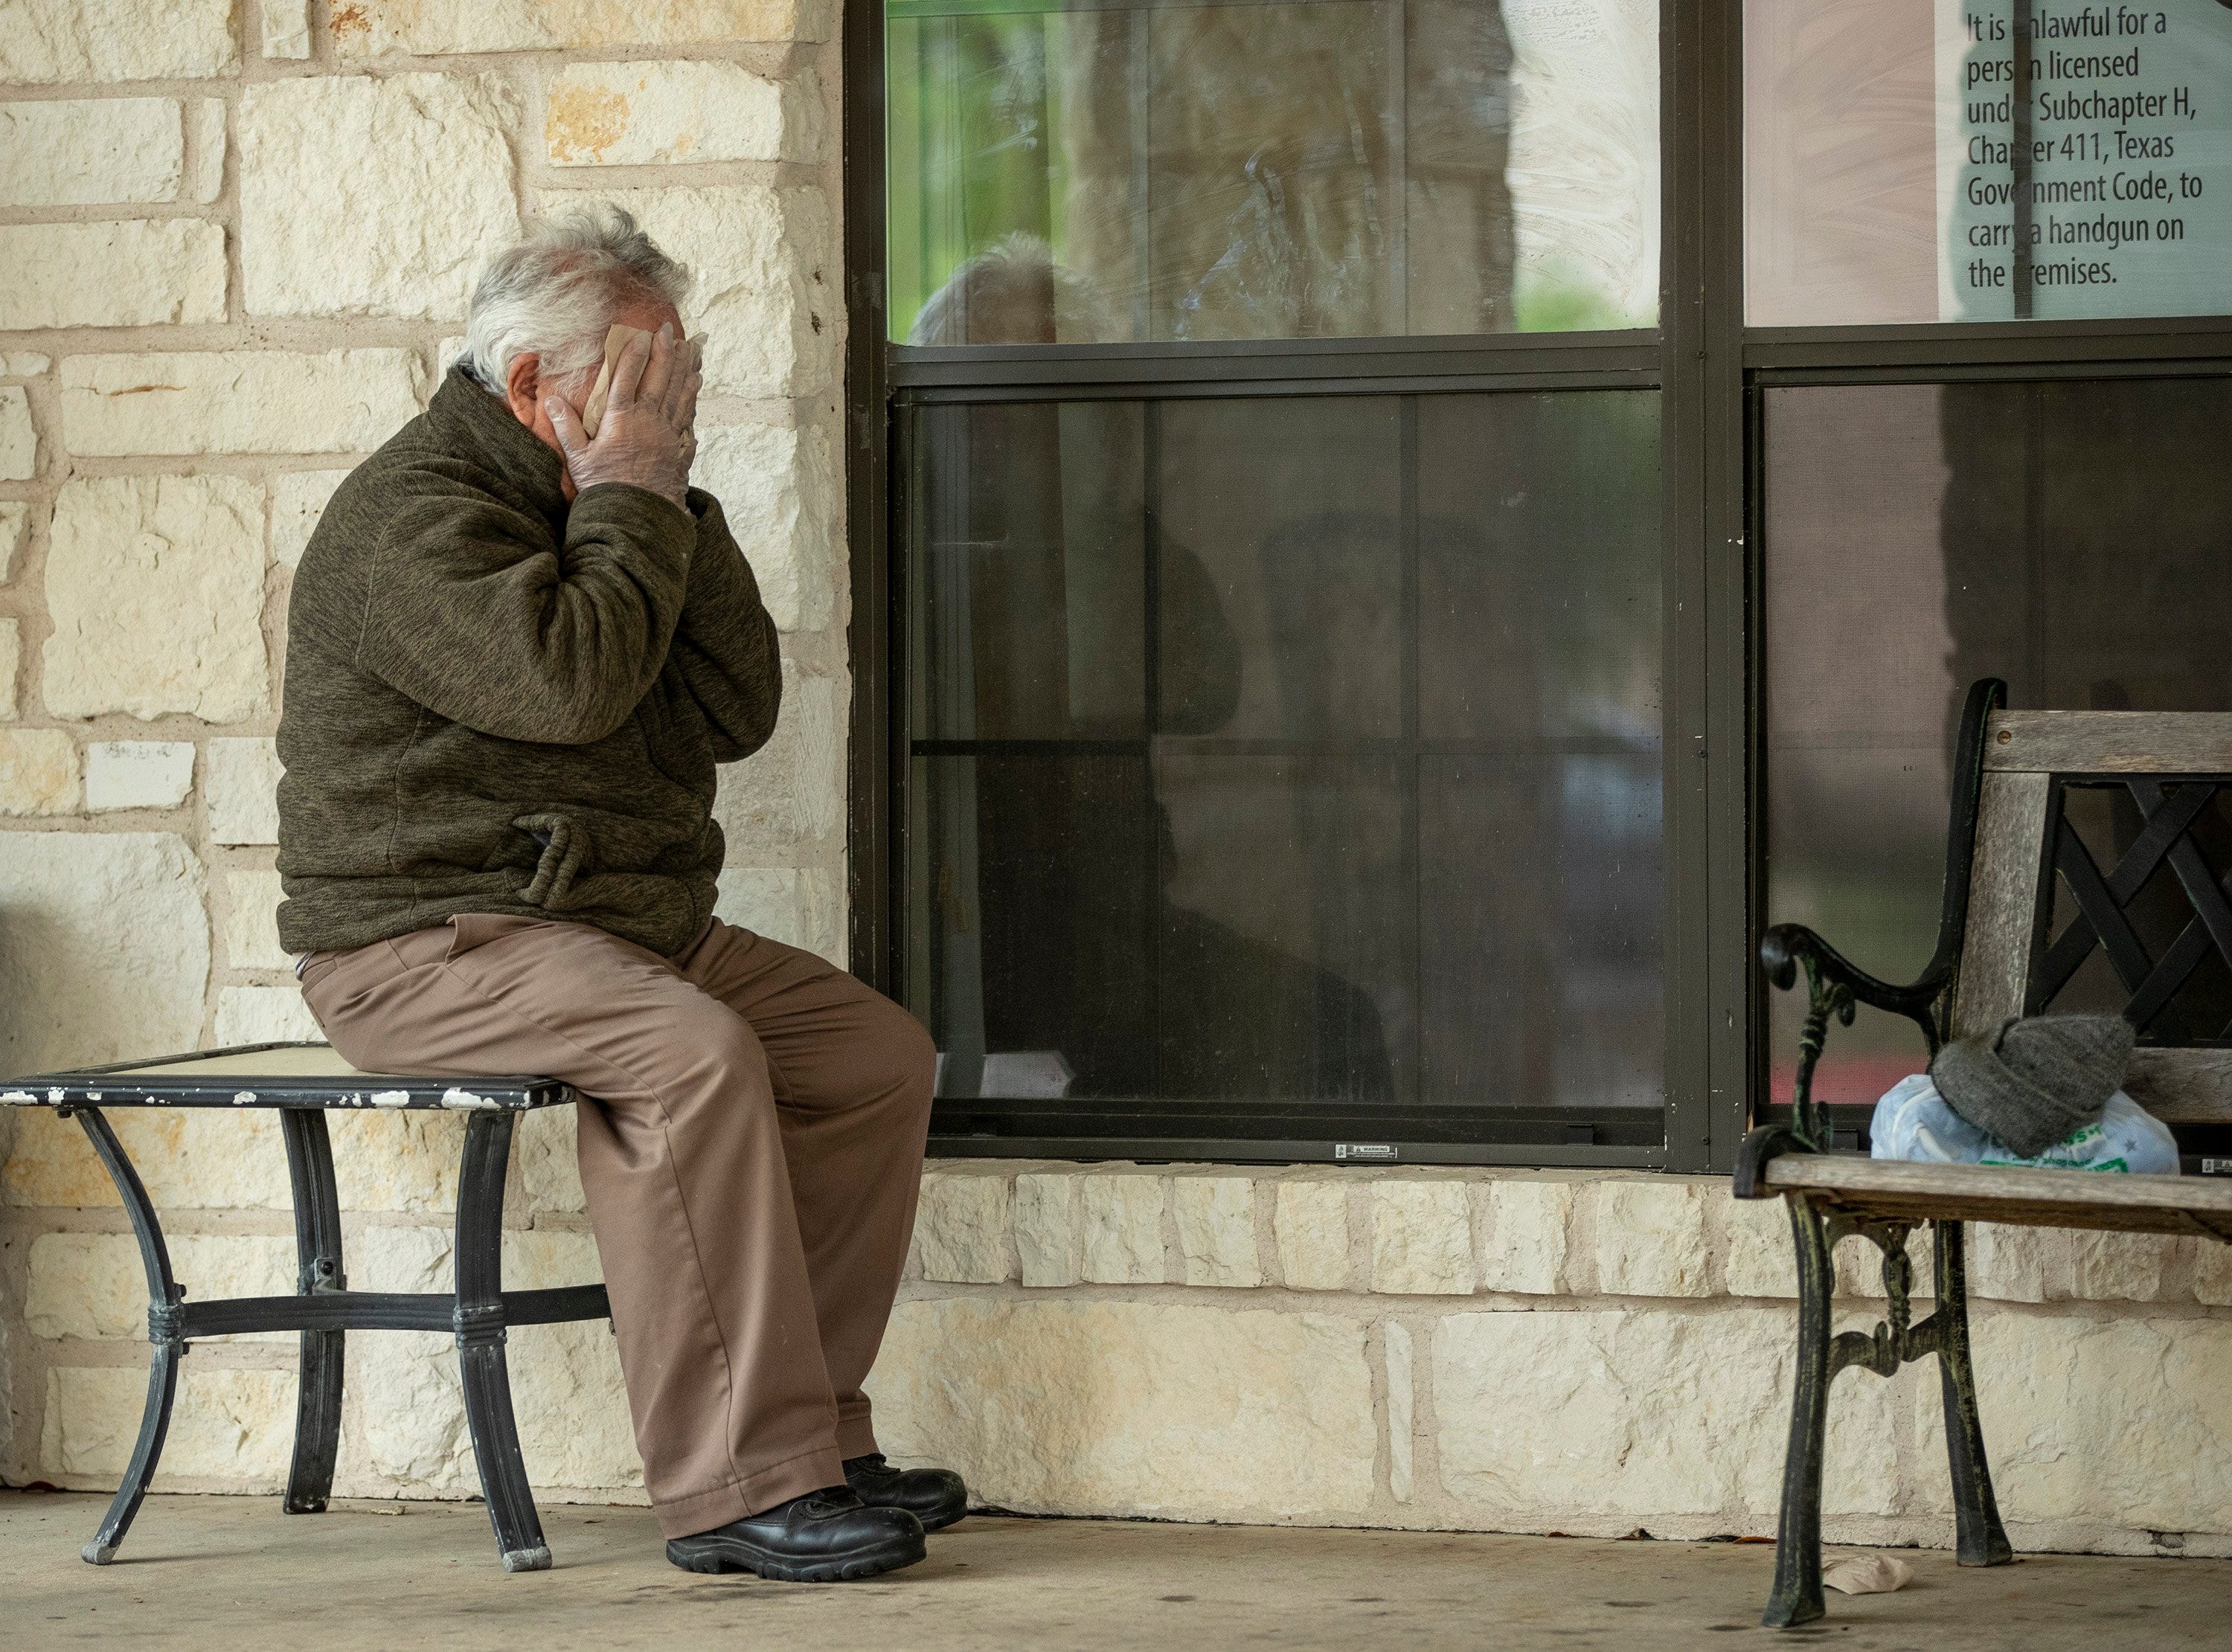 Gusto Monterrosa cries after talking through a window with his daughter who lives at Park Bend Health Center in North Austin on Sunday March 22, 2020, amid the coronavirus pandemic.